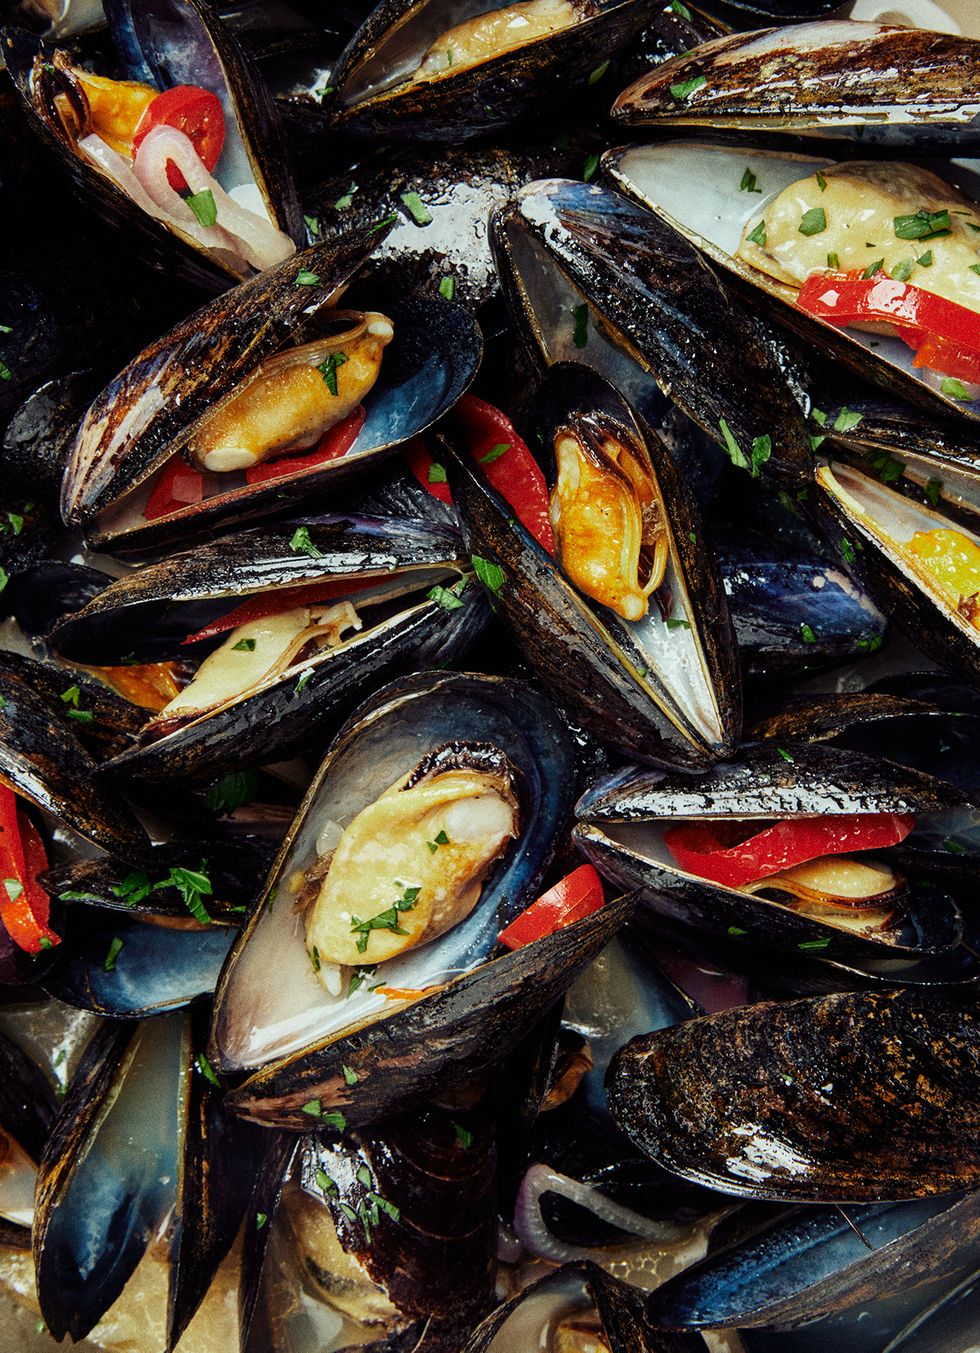 mussels seasoned with red pepper, onion, and herbs